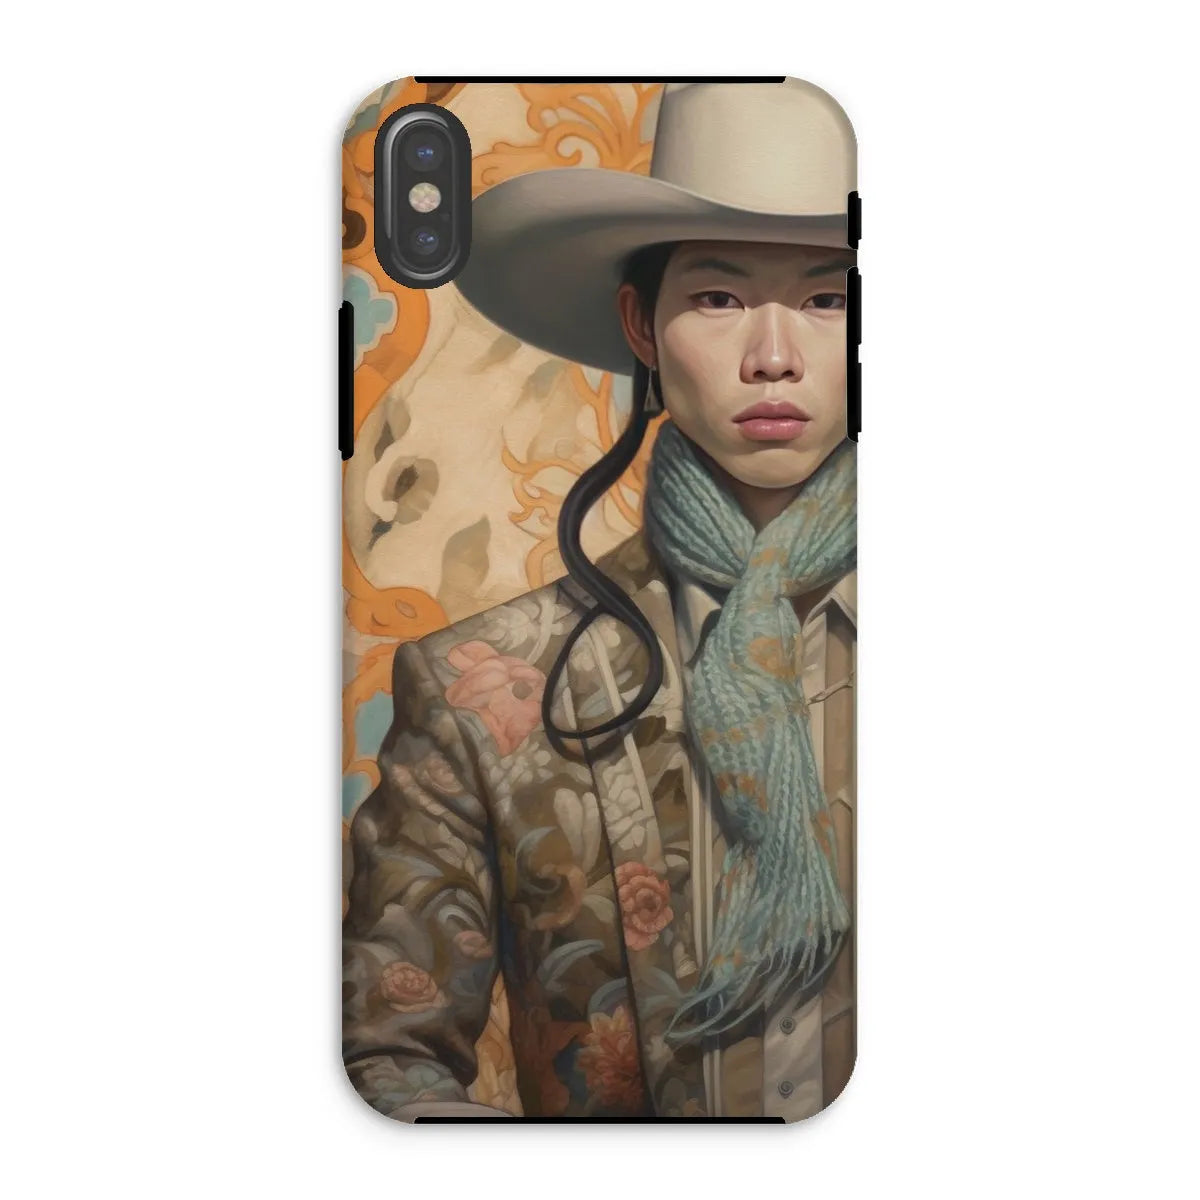 Baihu The Gay Cowboy - Gay Aesthetic Art Phone Case - Iphone Xs / Matte - Mobile Phone Cases - Aesthetic Art